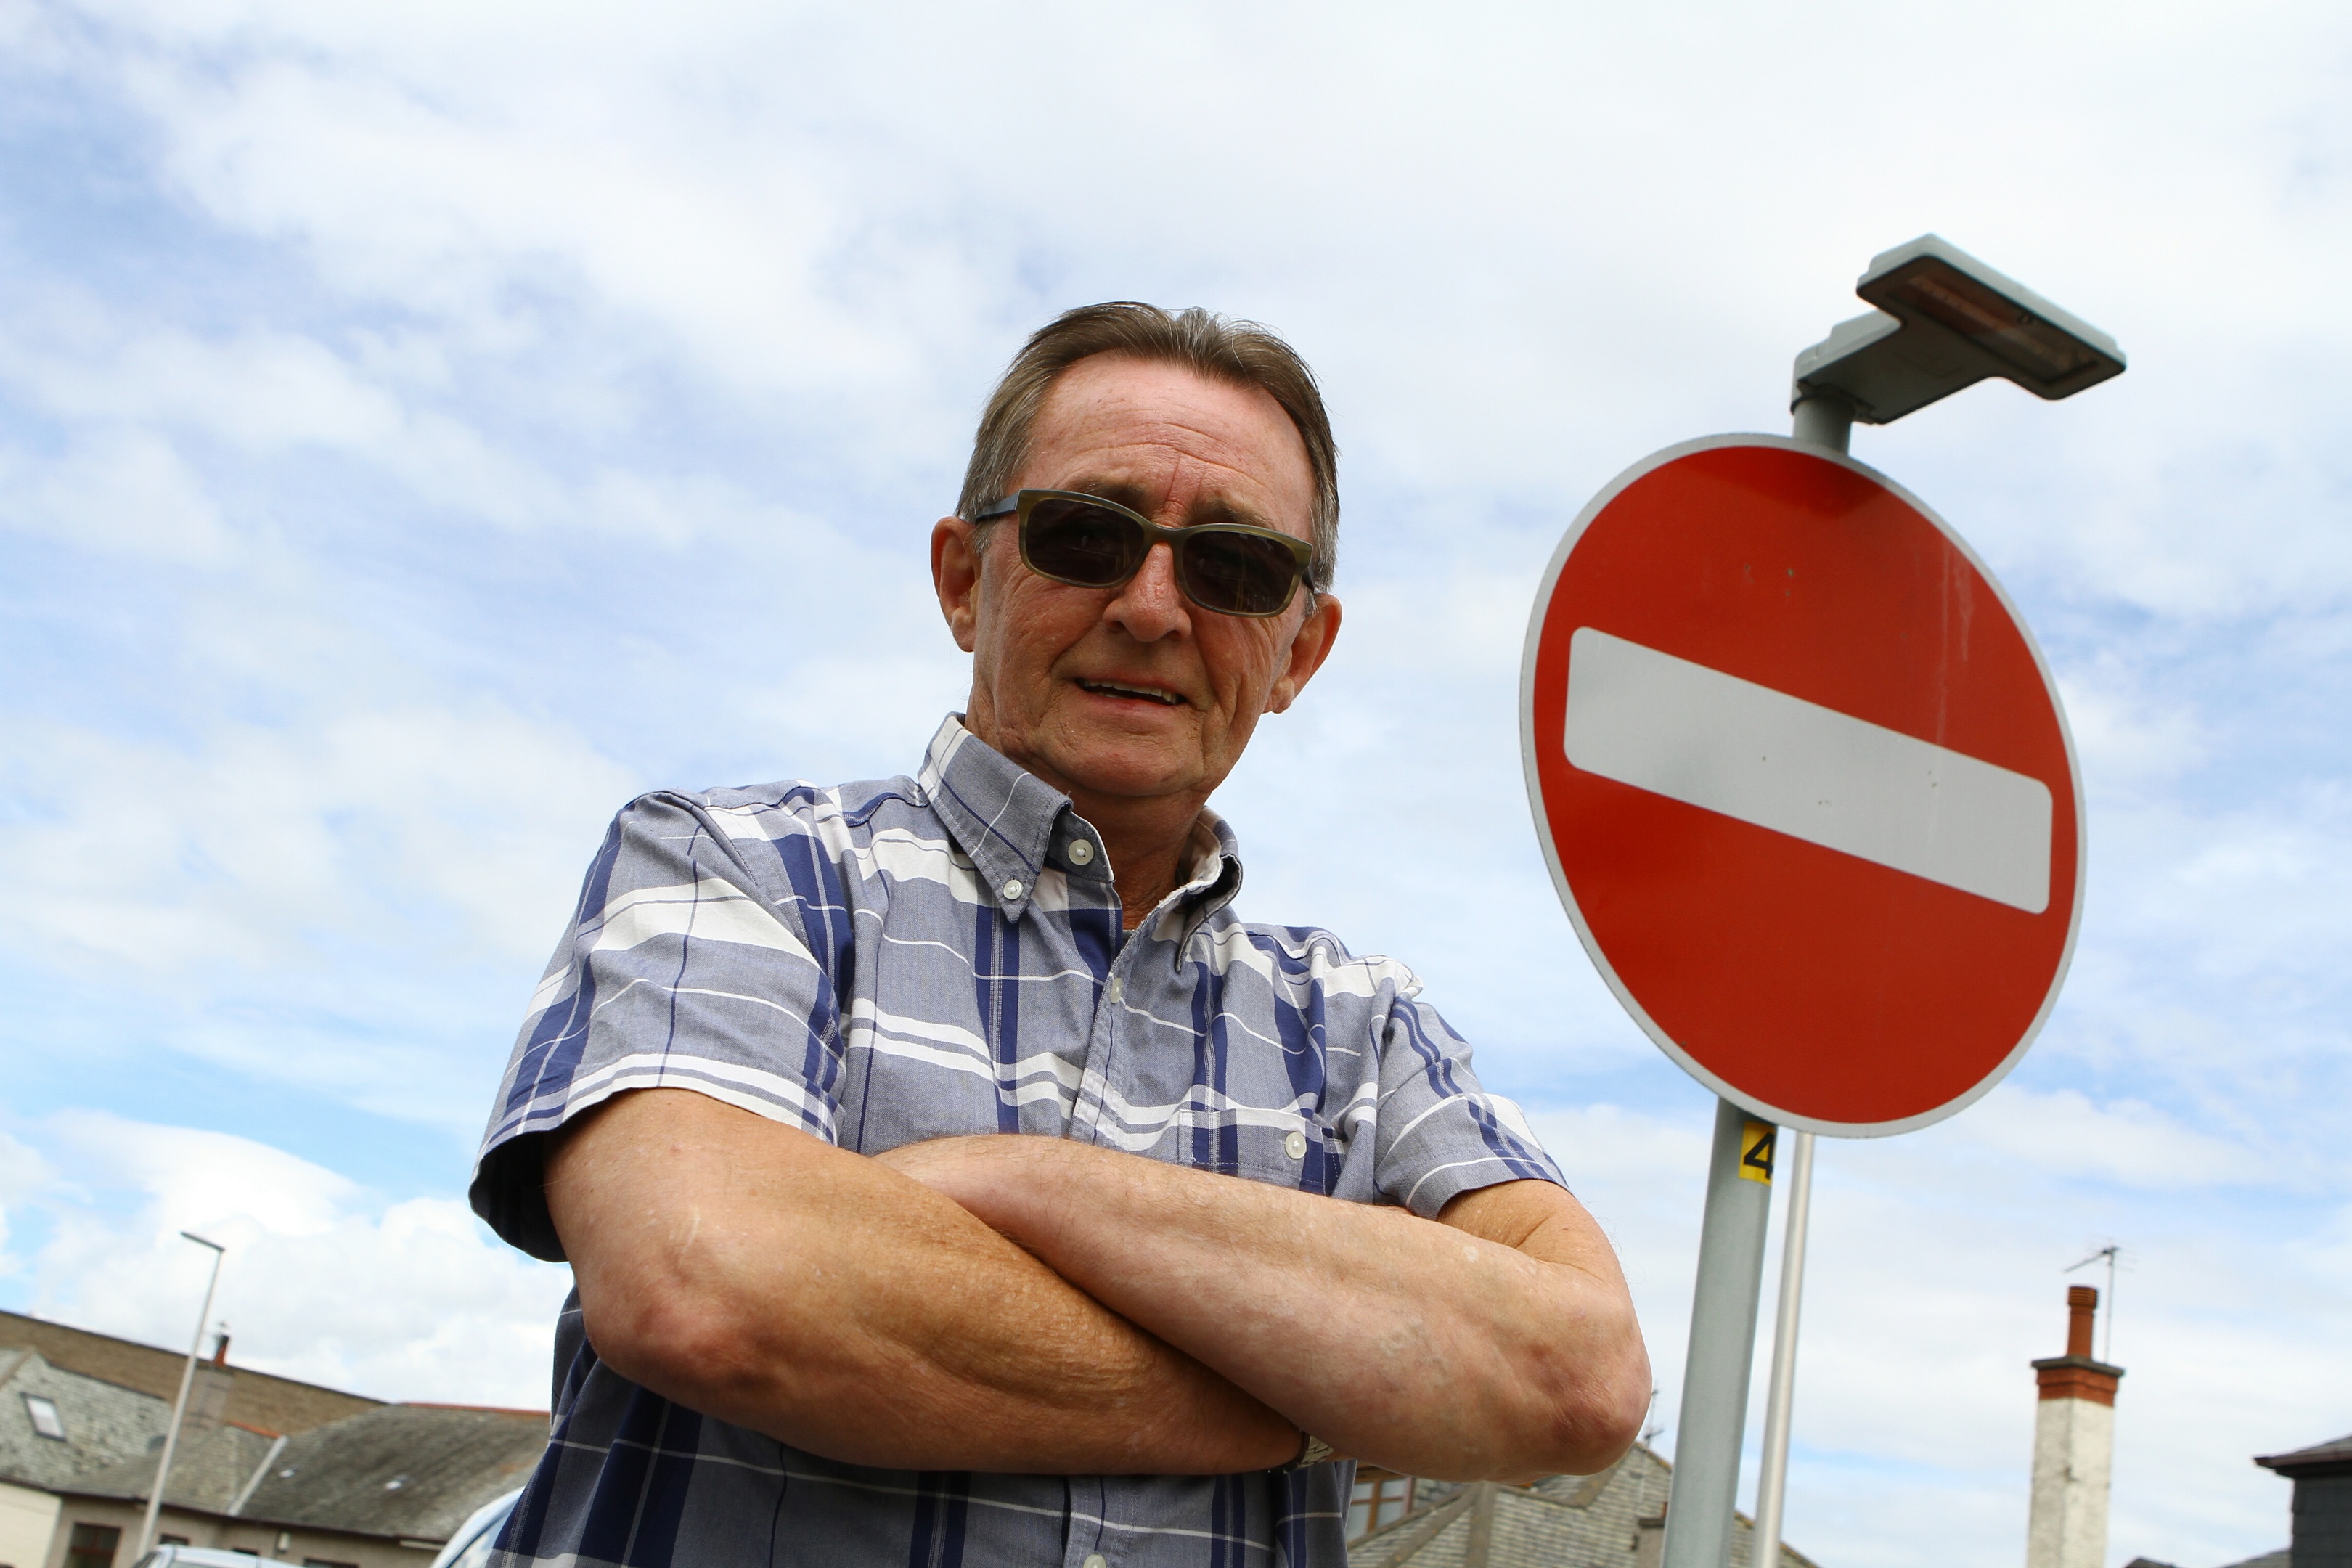 Resident Charlie Steele says he has seen HGVs reversing back up the one-way street